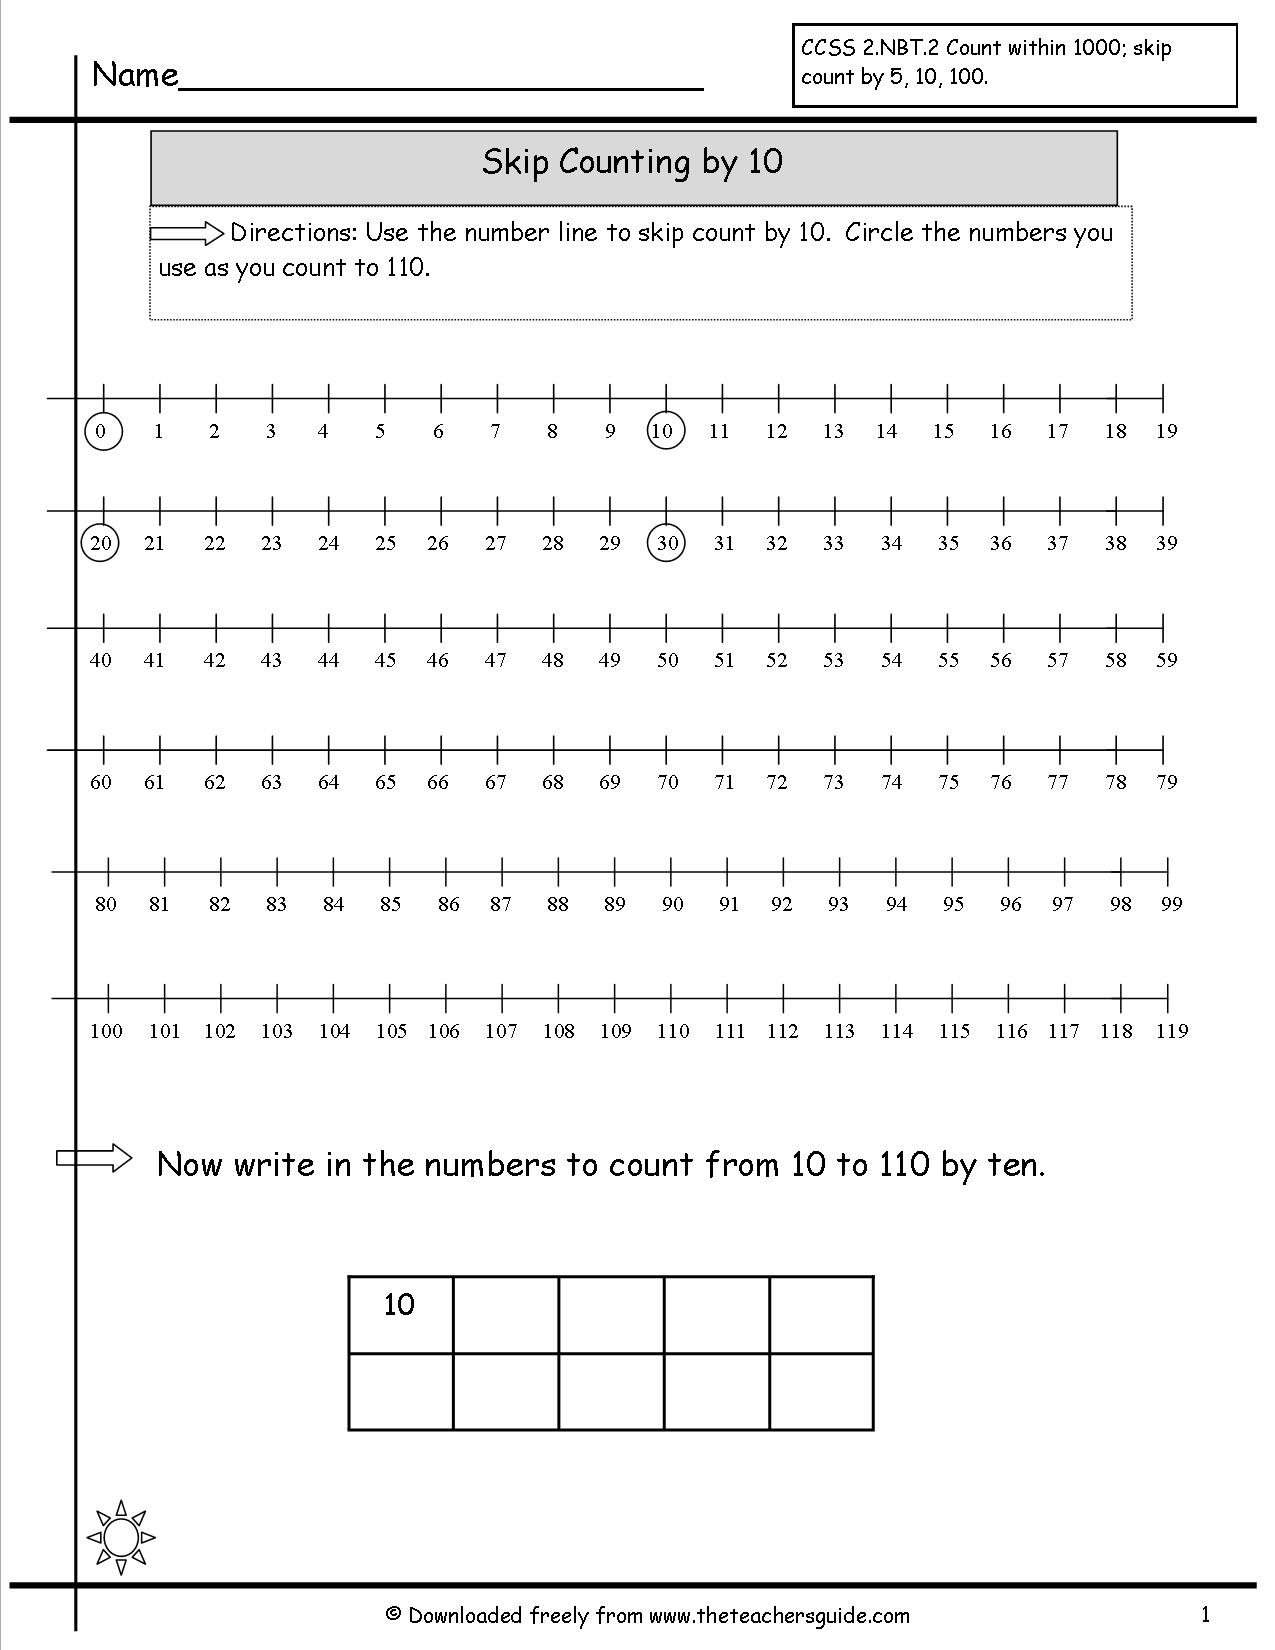 10-skip-counting-by-2s-worksheets-worksheeto